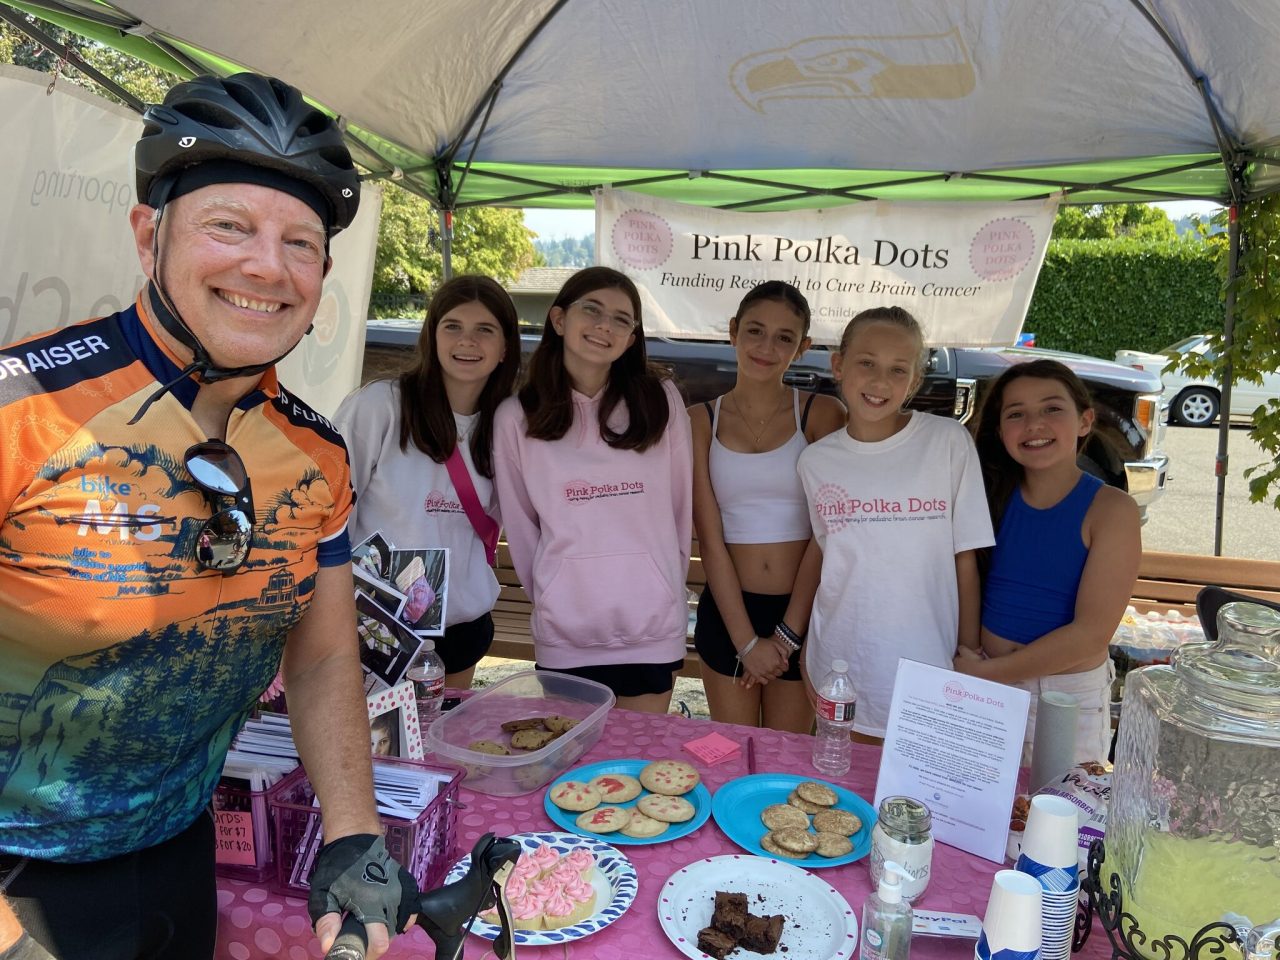 Jim Olsen: Having raised $1 million for pediatric brain tumor research, the Seattle Children’s Pink Polka Dots junior guild continues to support our work.